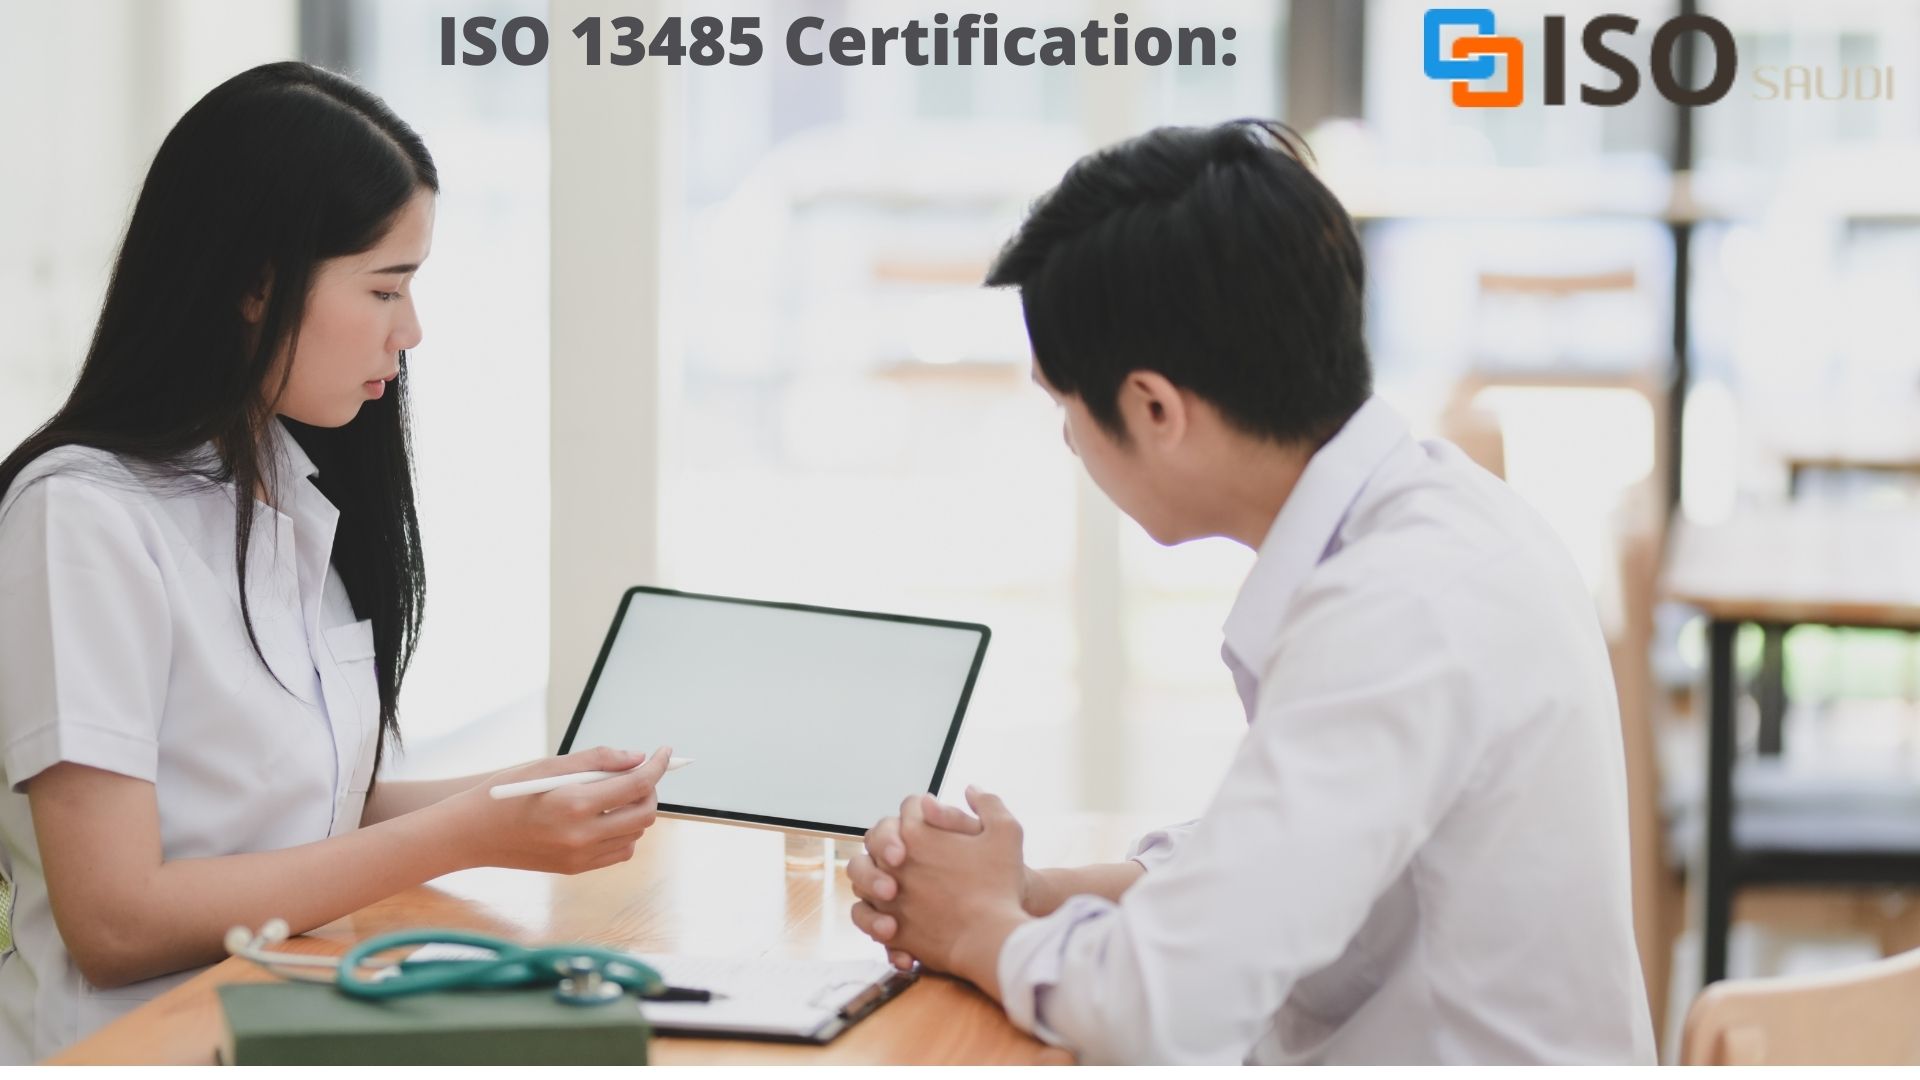 Purpose of ISO 13485 certification: Medical devices